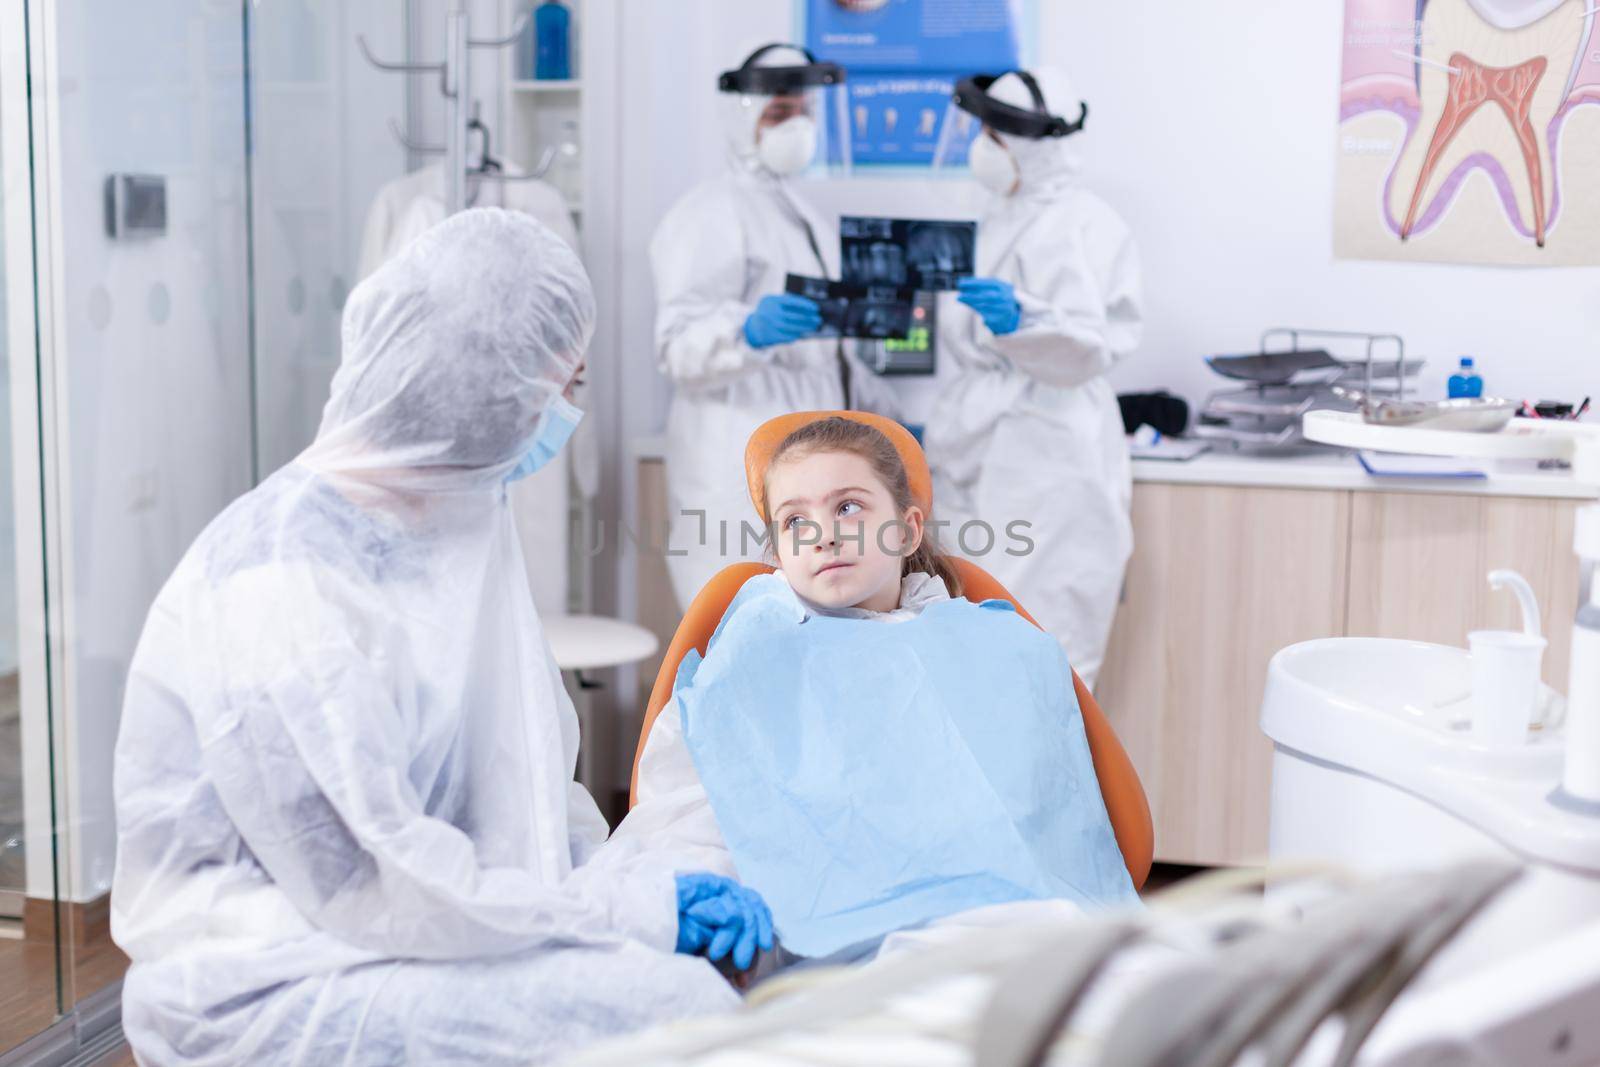 Girl looking pensive mother sitting on dental chair wearing coverall because of coronavirus outbreak. Stomatologist during covid19 wearing ppe suit doing teeth procedure of child sitting on chair.